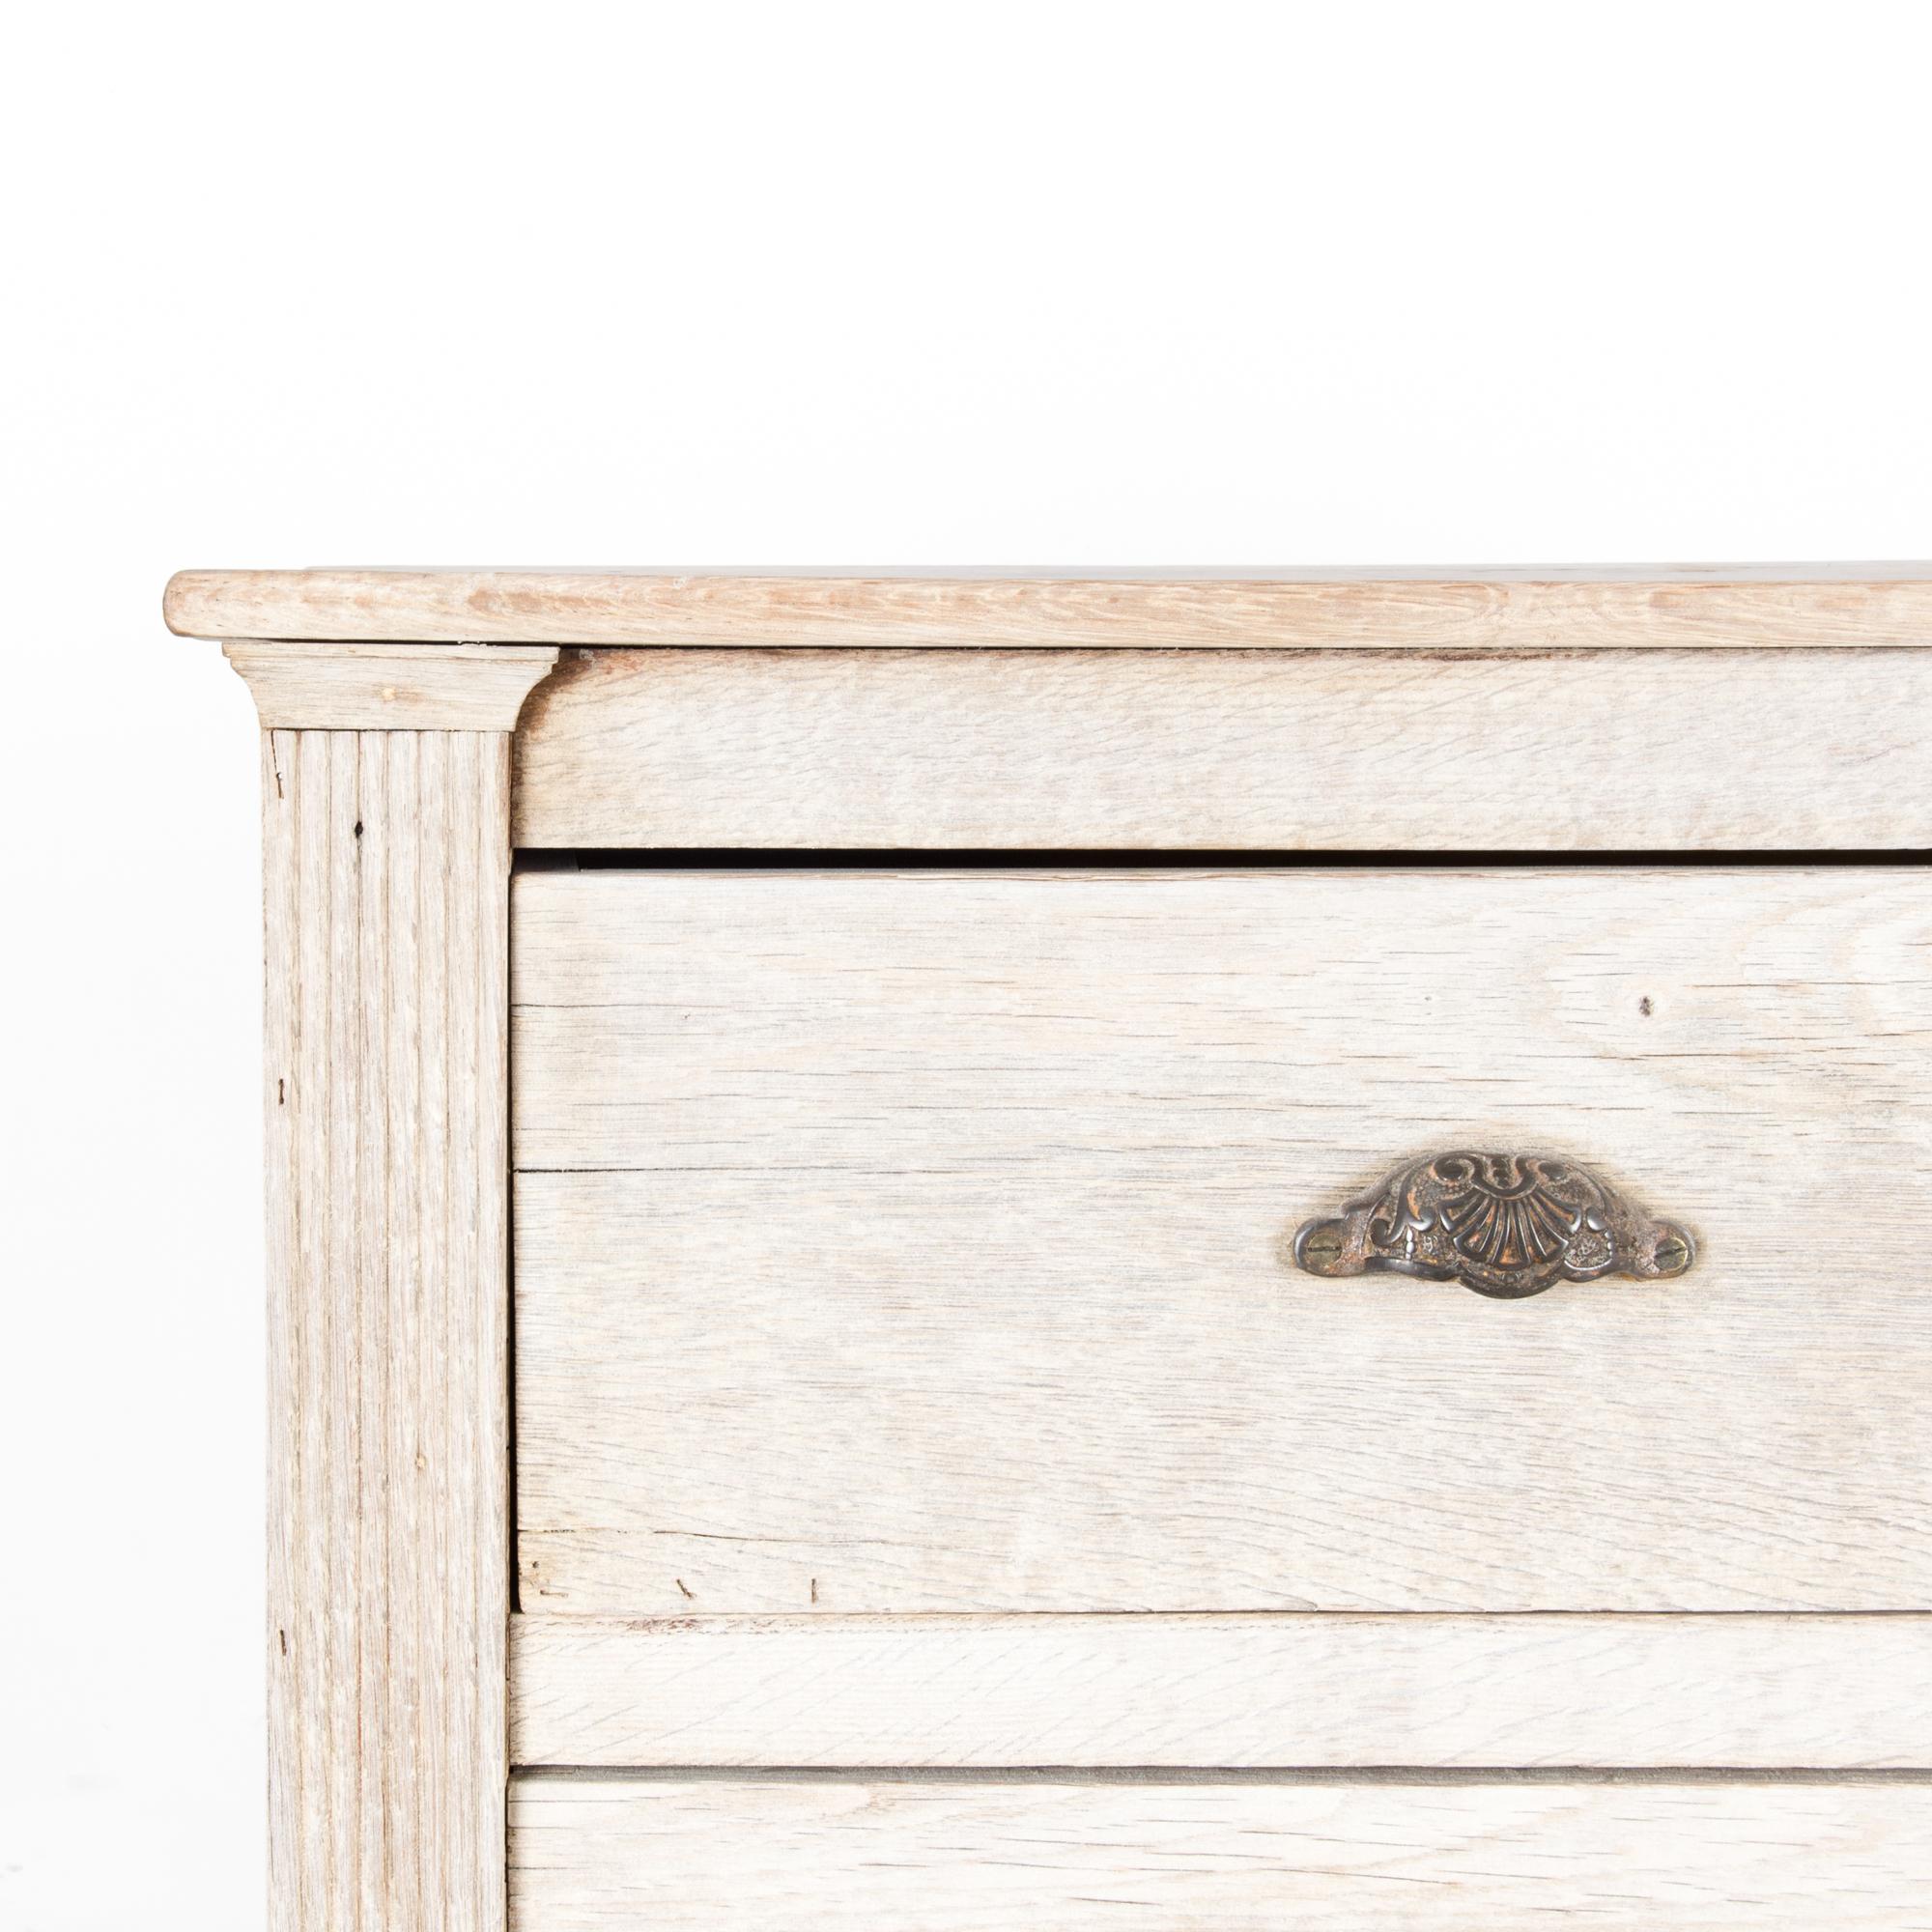 A chest of drawers from France, circa 1860, in brightly finished oak. Three drawers sport original handles and lock pieces, made of a dark, patinated brass. Square fluted column moldings evoke a neoclassical sensibility. Cup handles are embellished